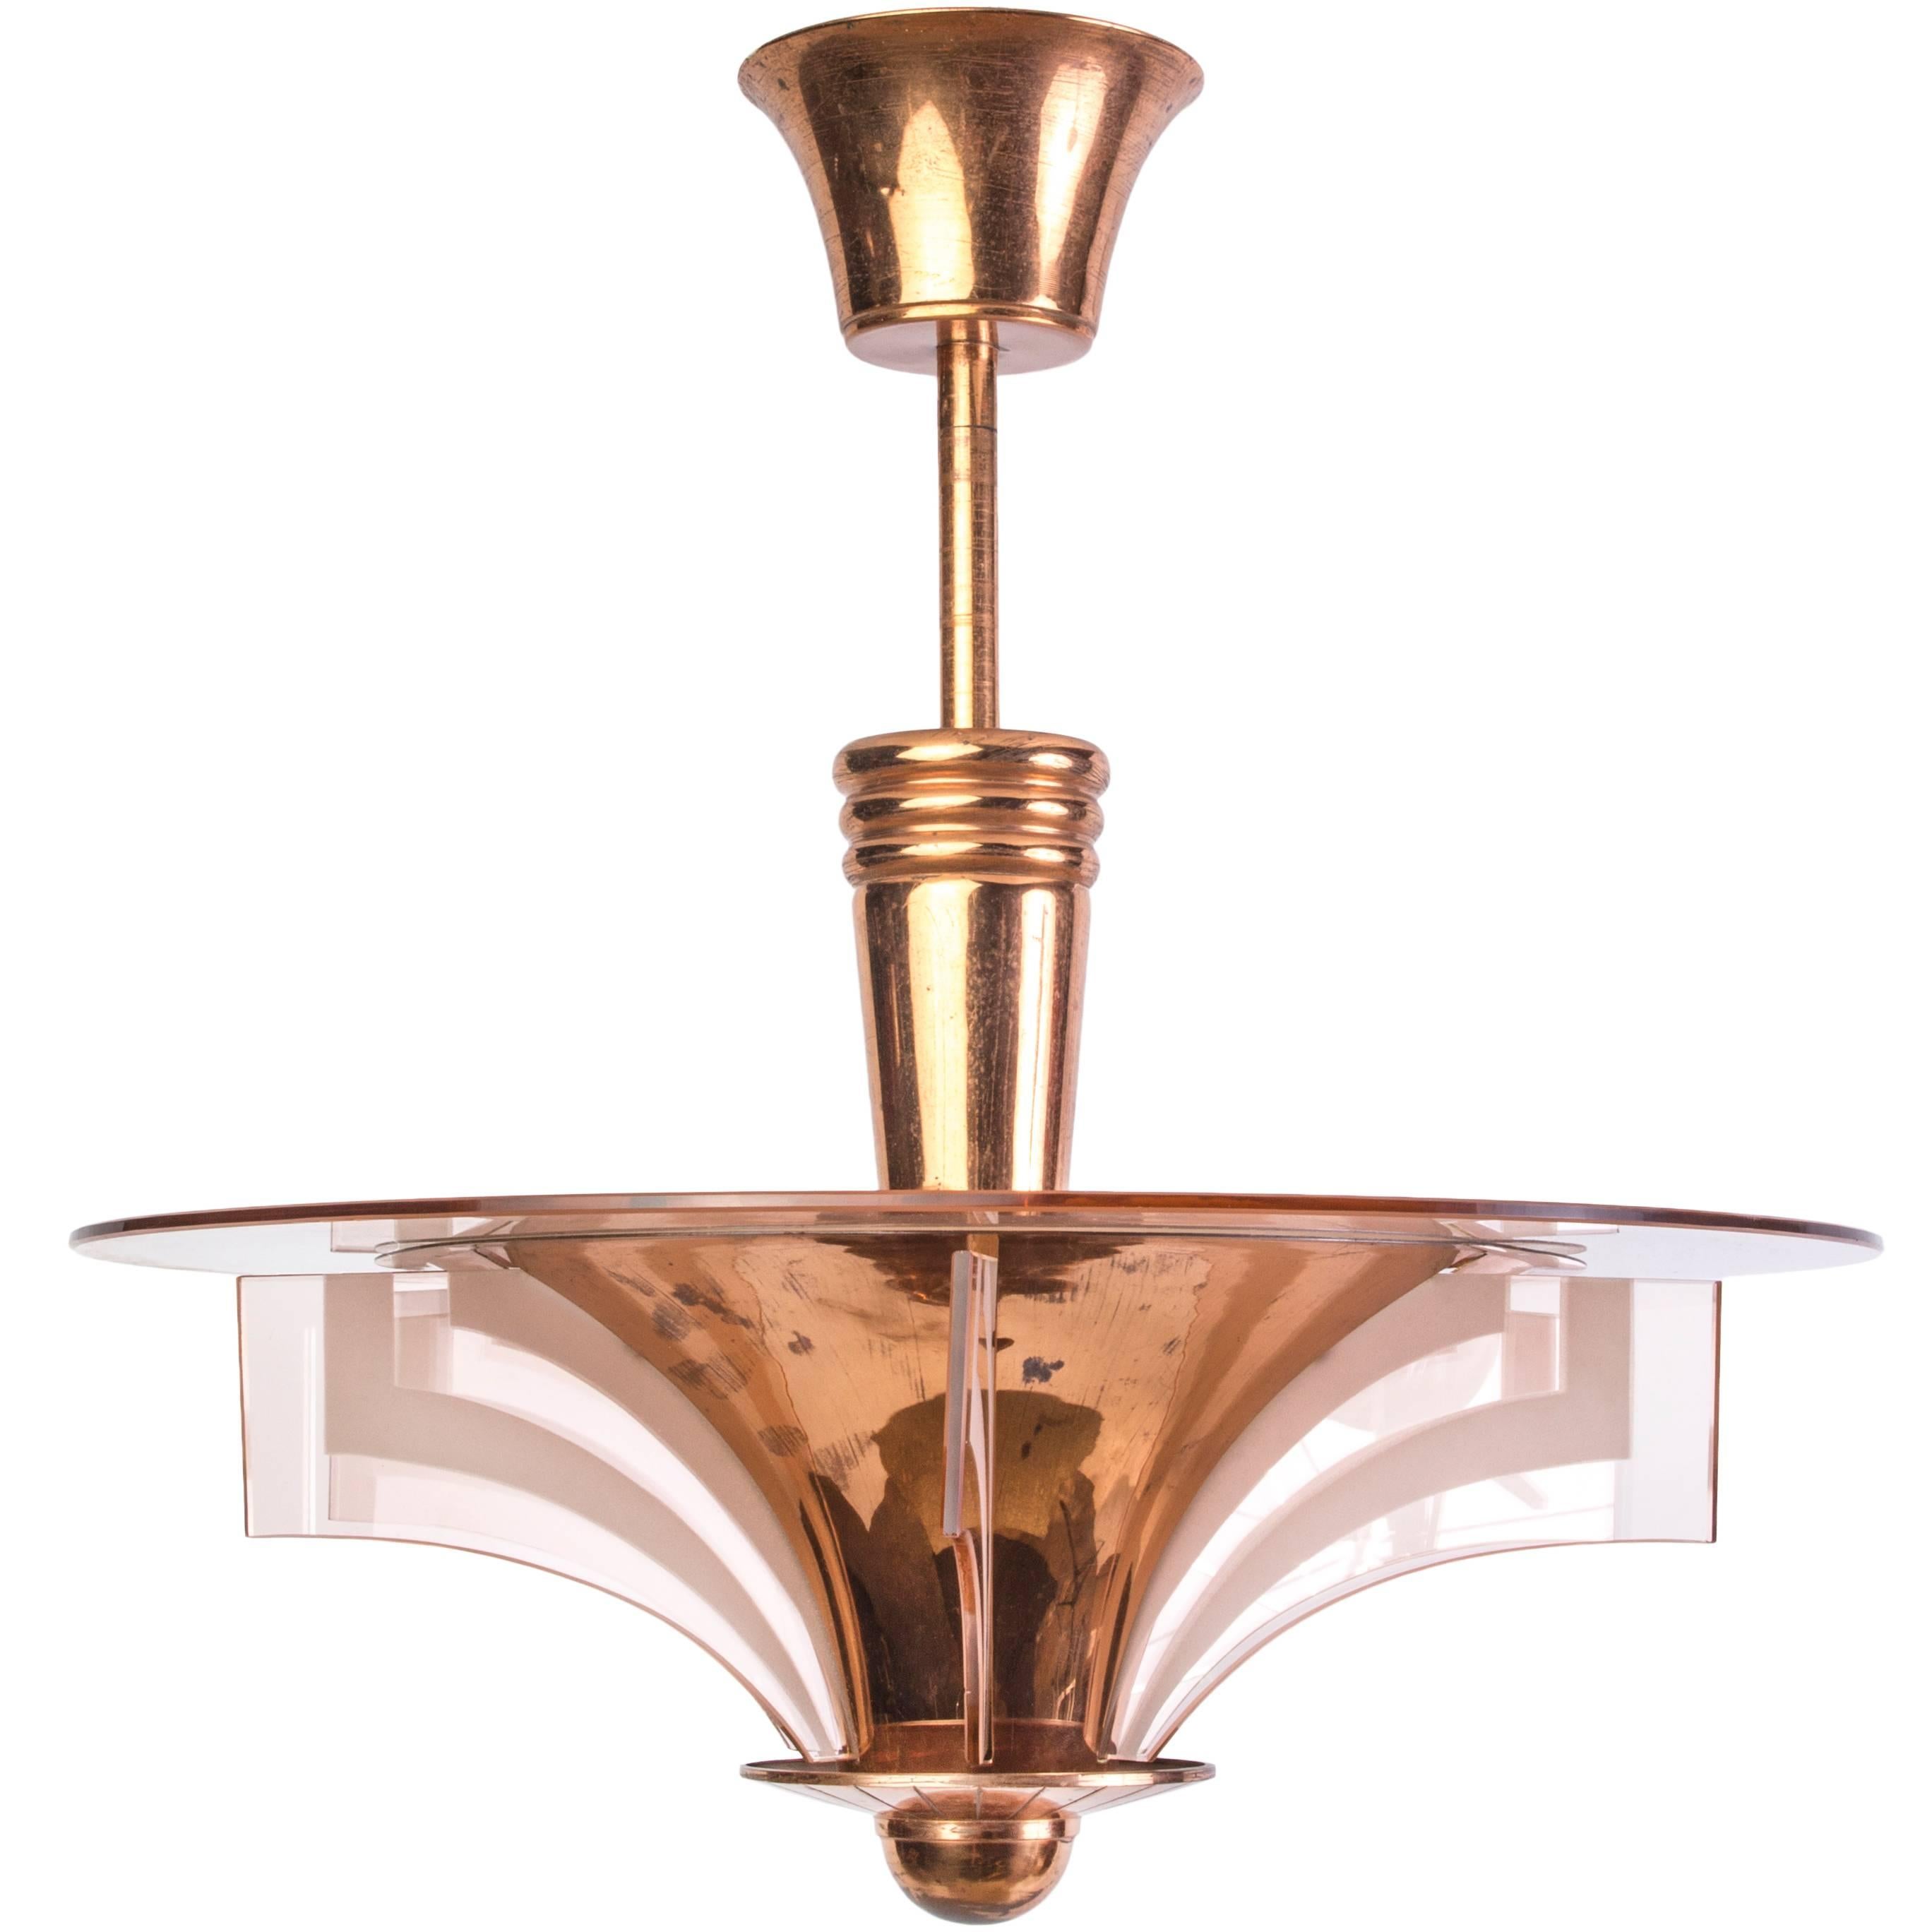 Stunning French Art Deco Chandelier by Petitot For Sale